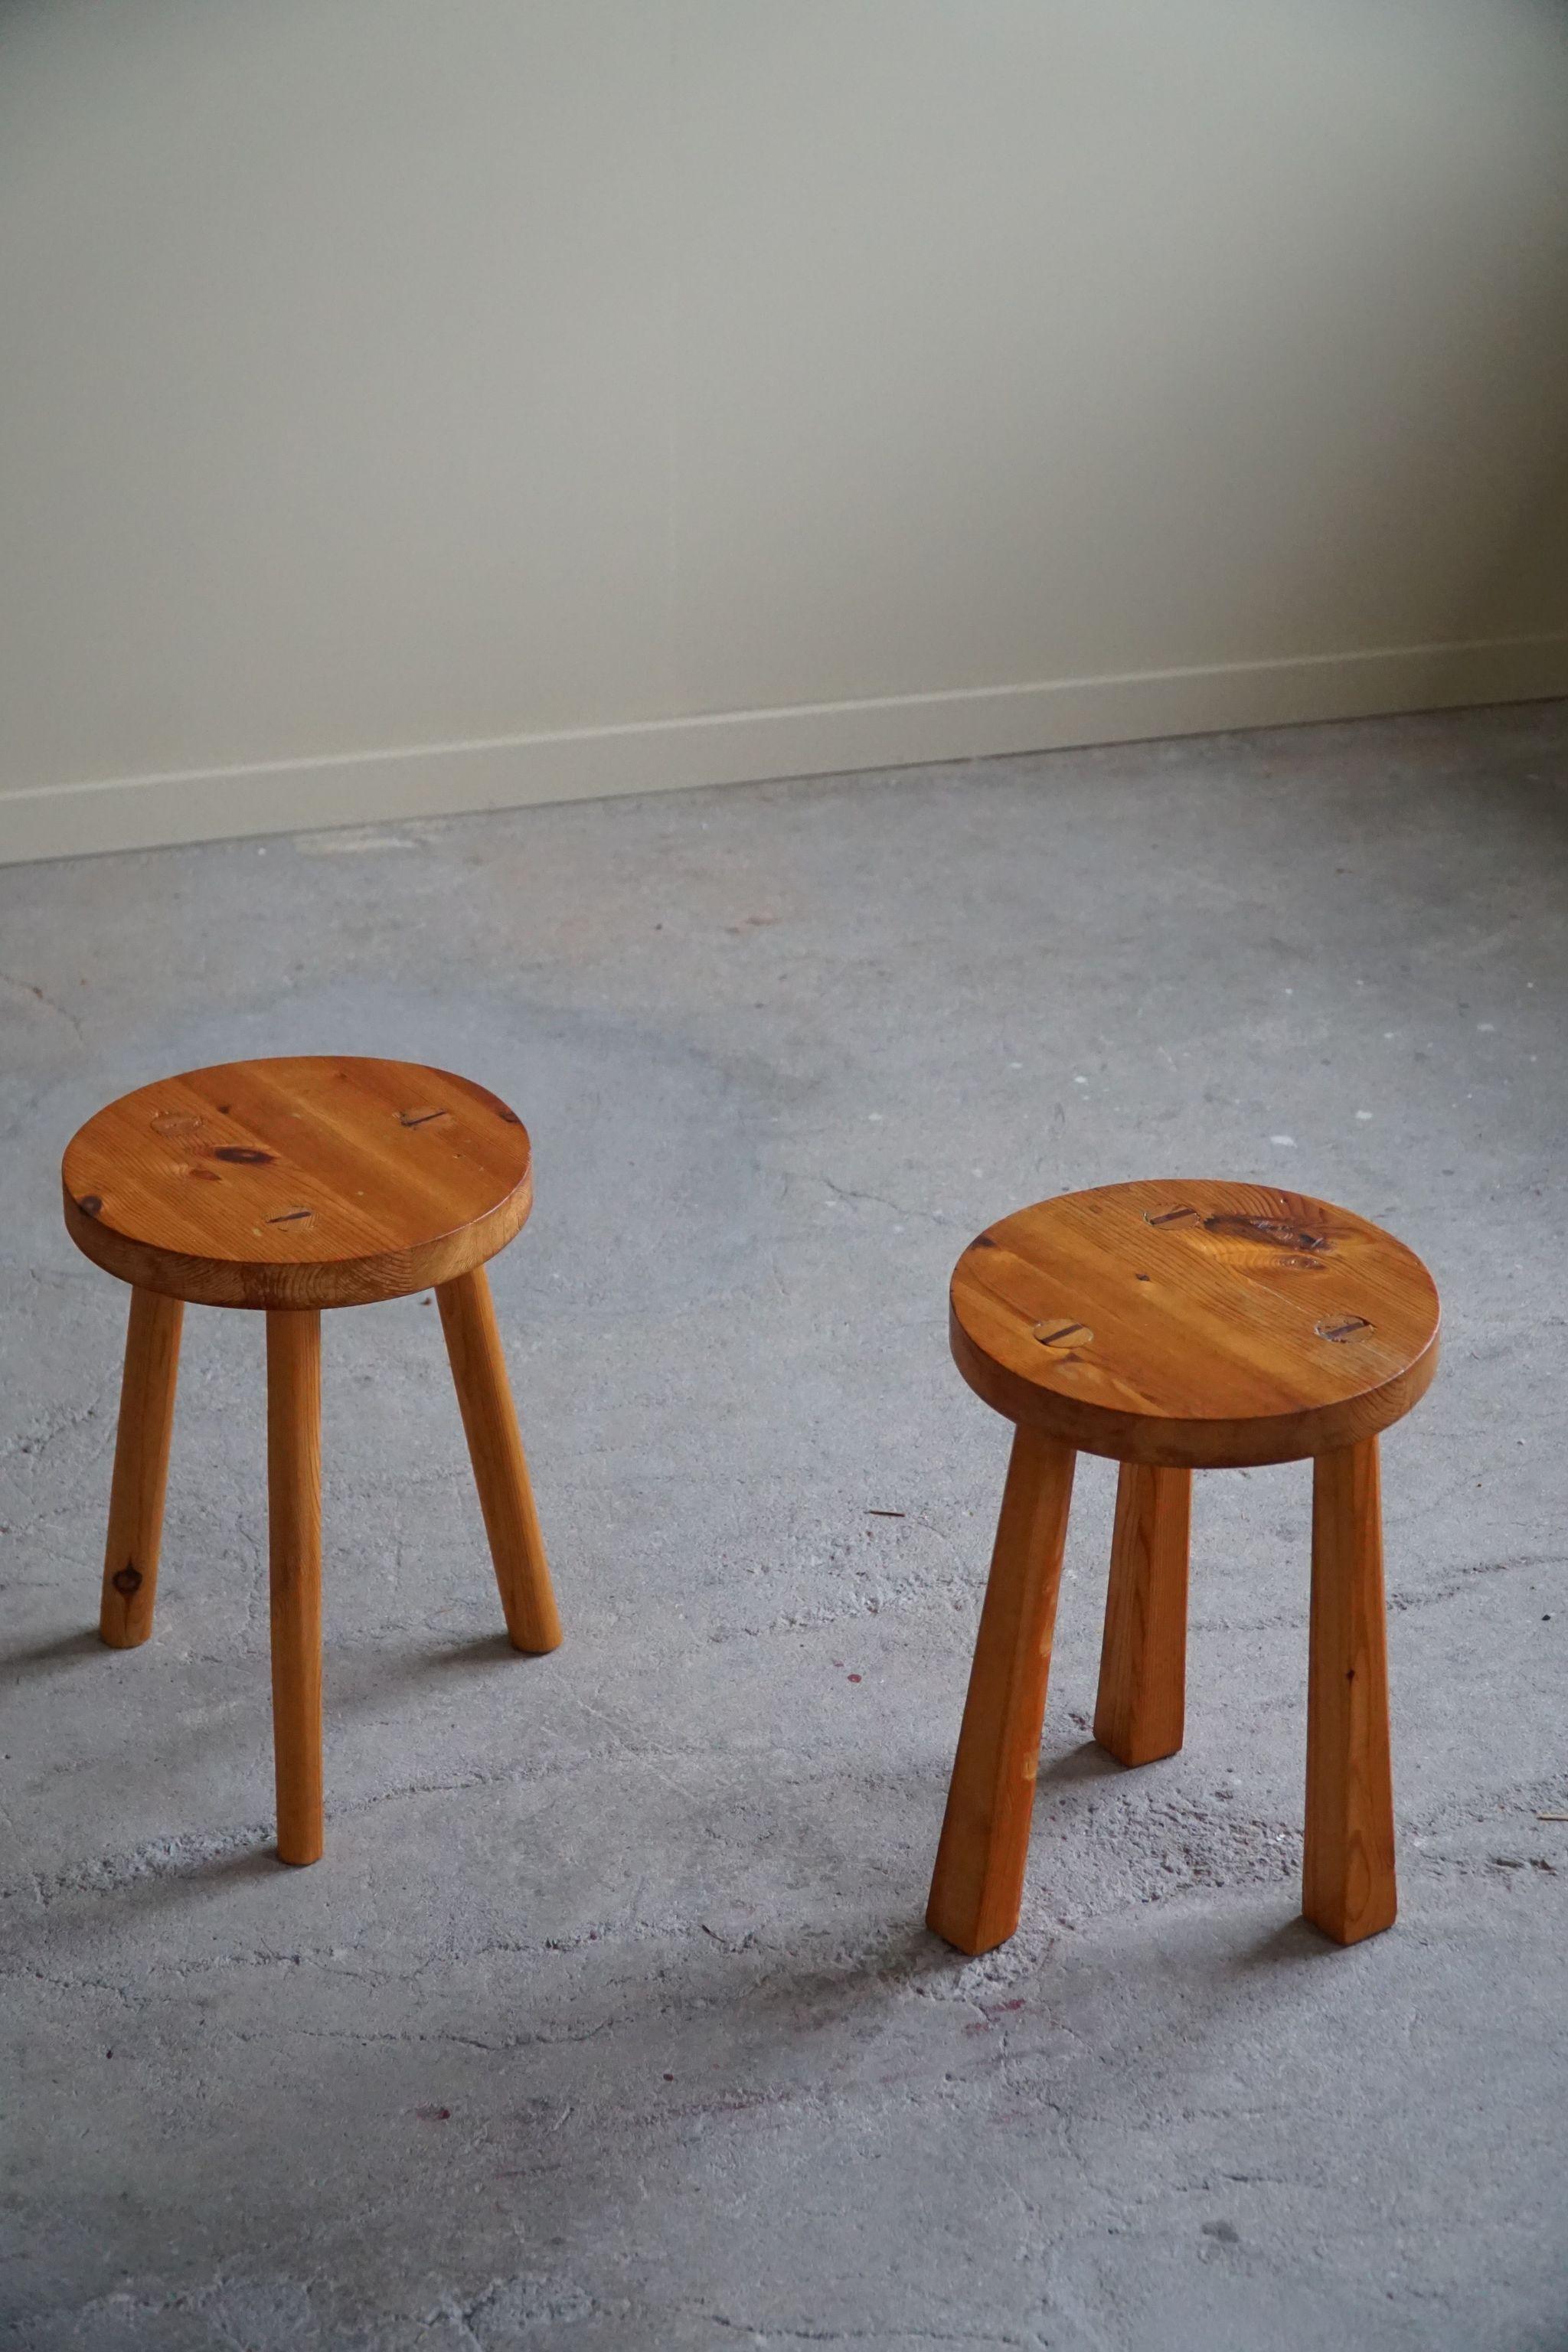 Pair of Tripod Stools in Pine, by Swedish Cabinetmaker, Mid Century, Ca 1960s For Sale 6